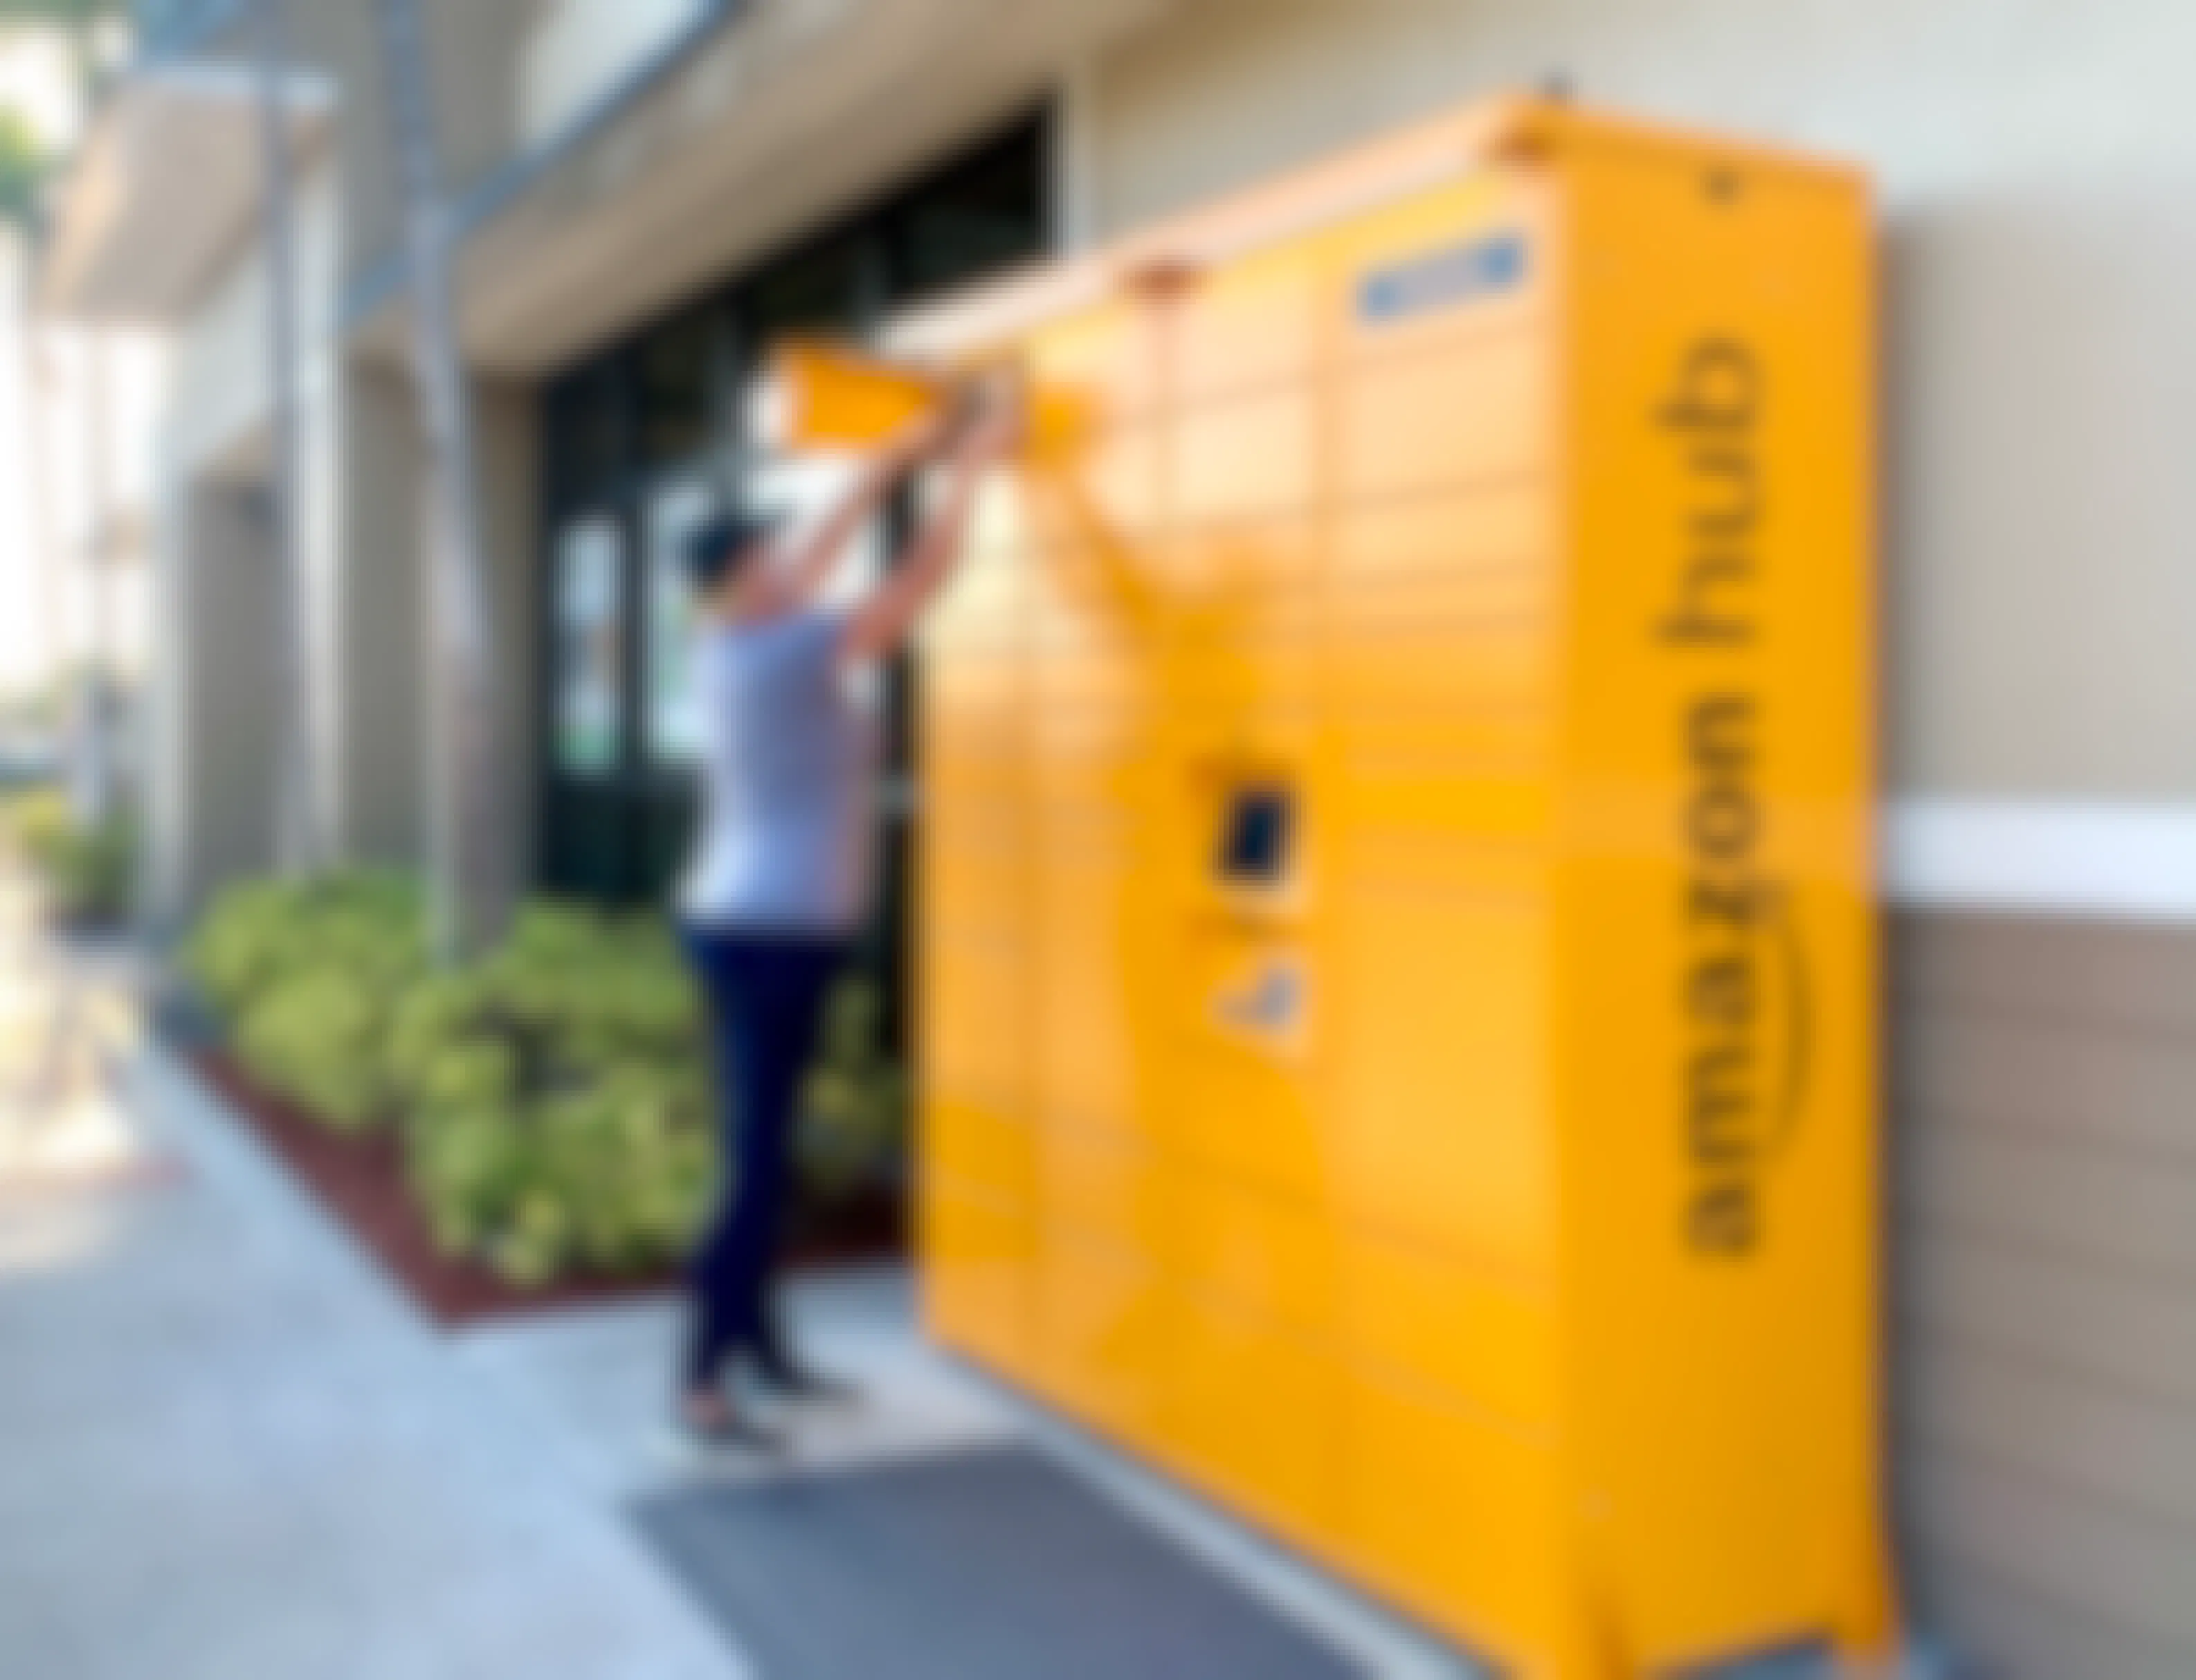 A woman taking an Amazon package out of an Amazon hub locker.